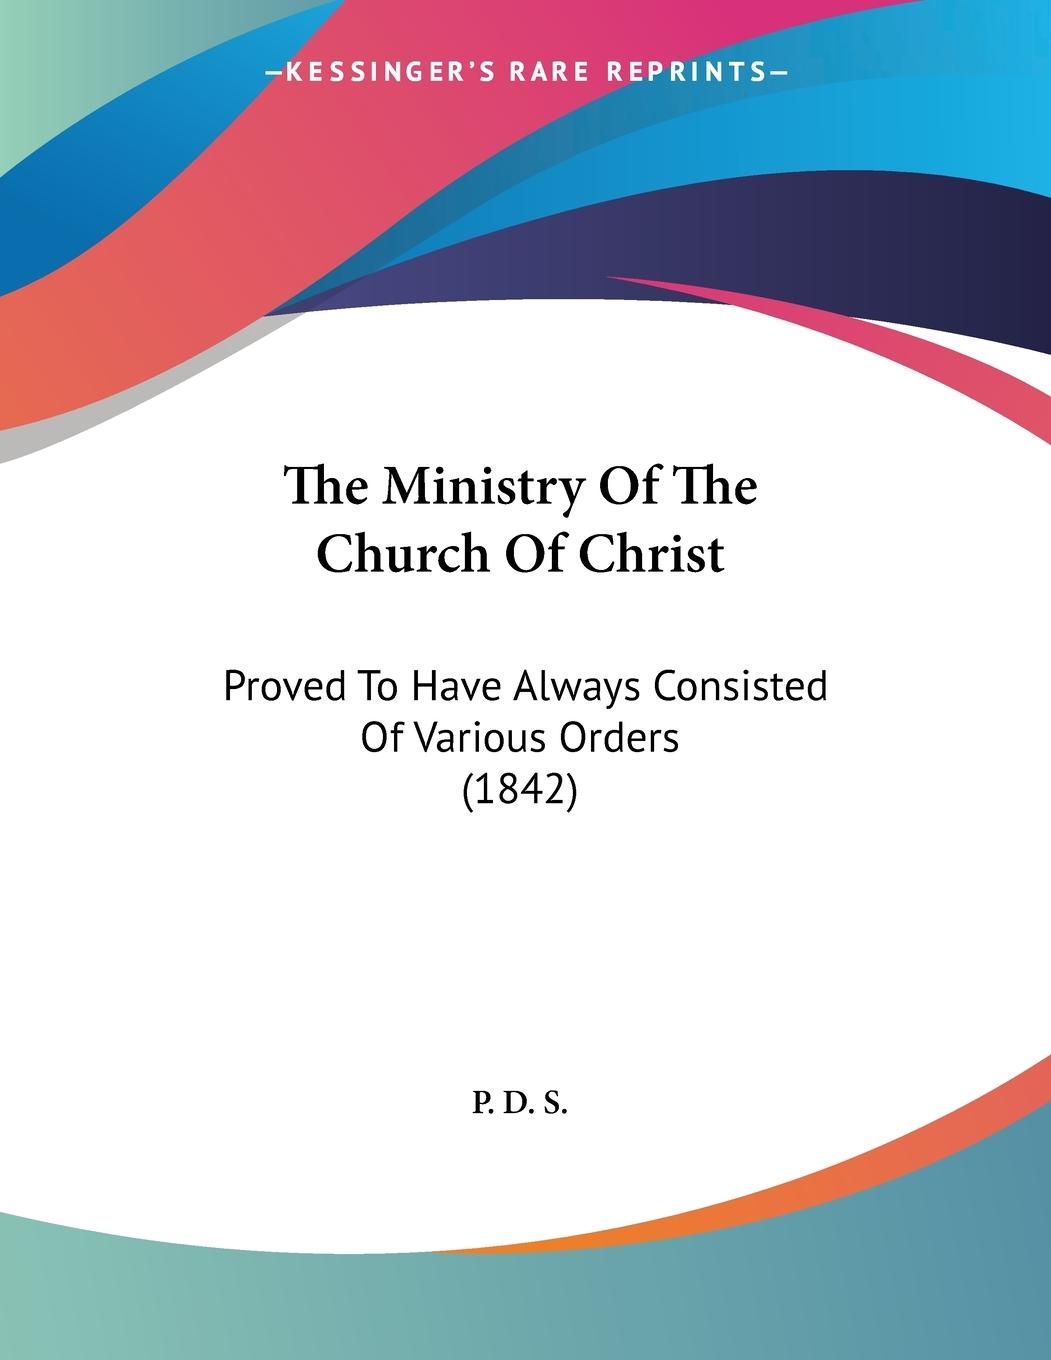 The Ministry Of The Church Of Christ - P. D. S.